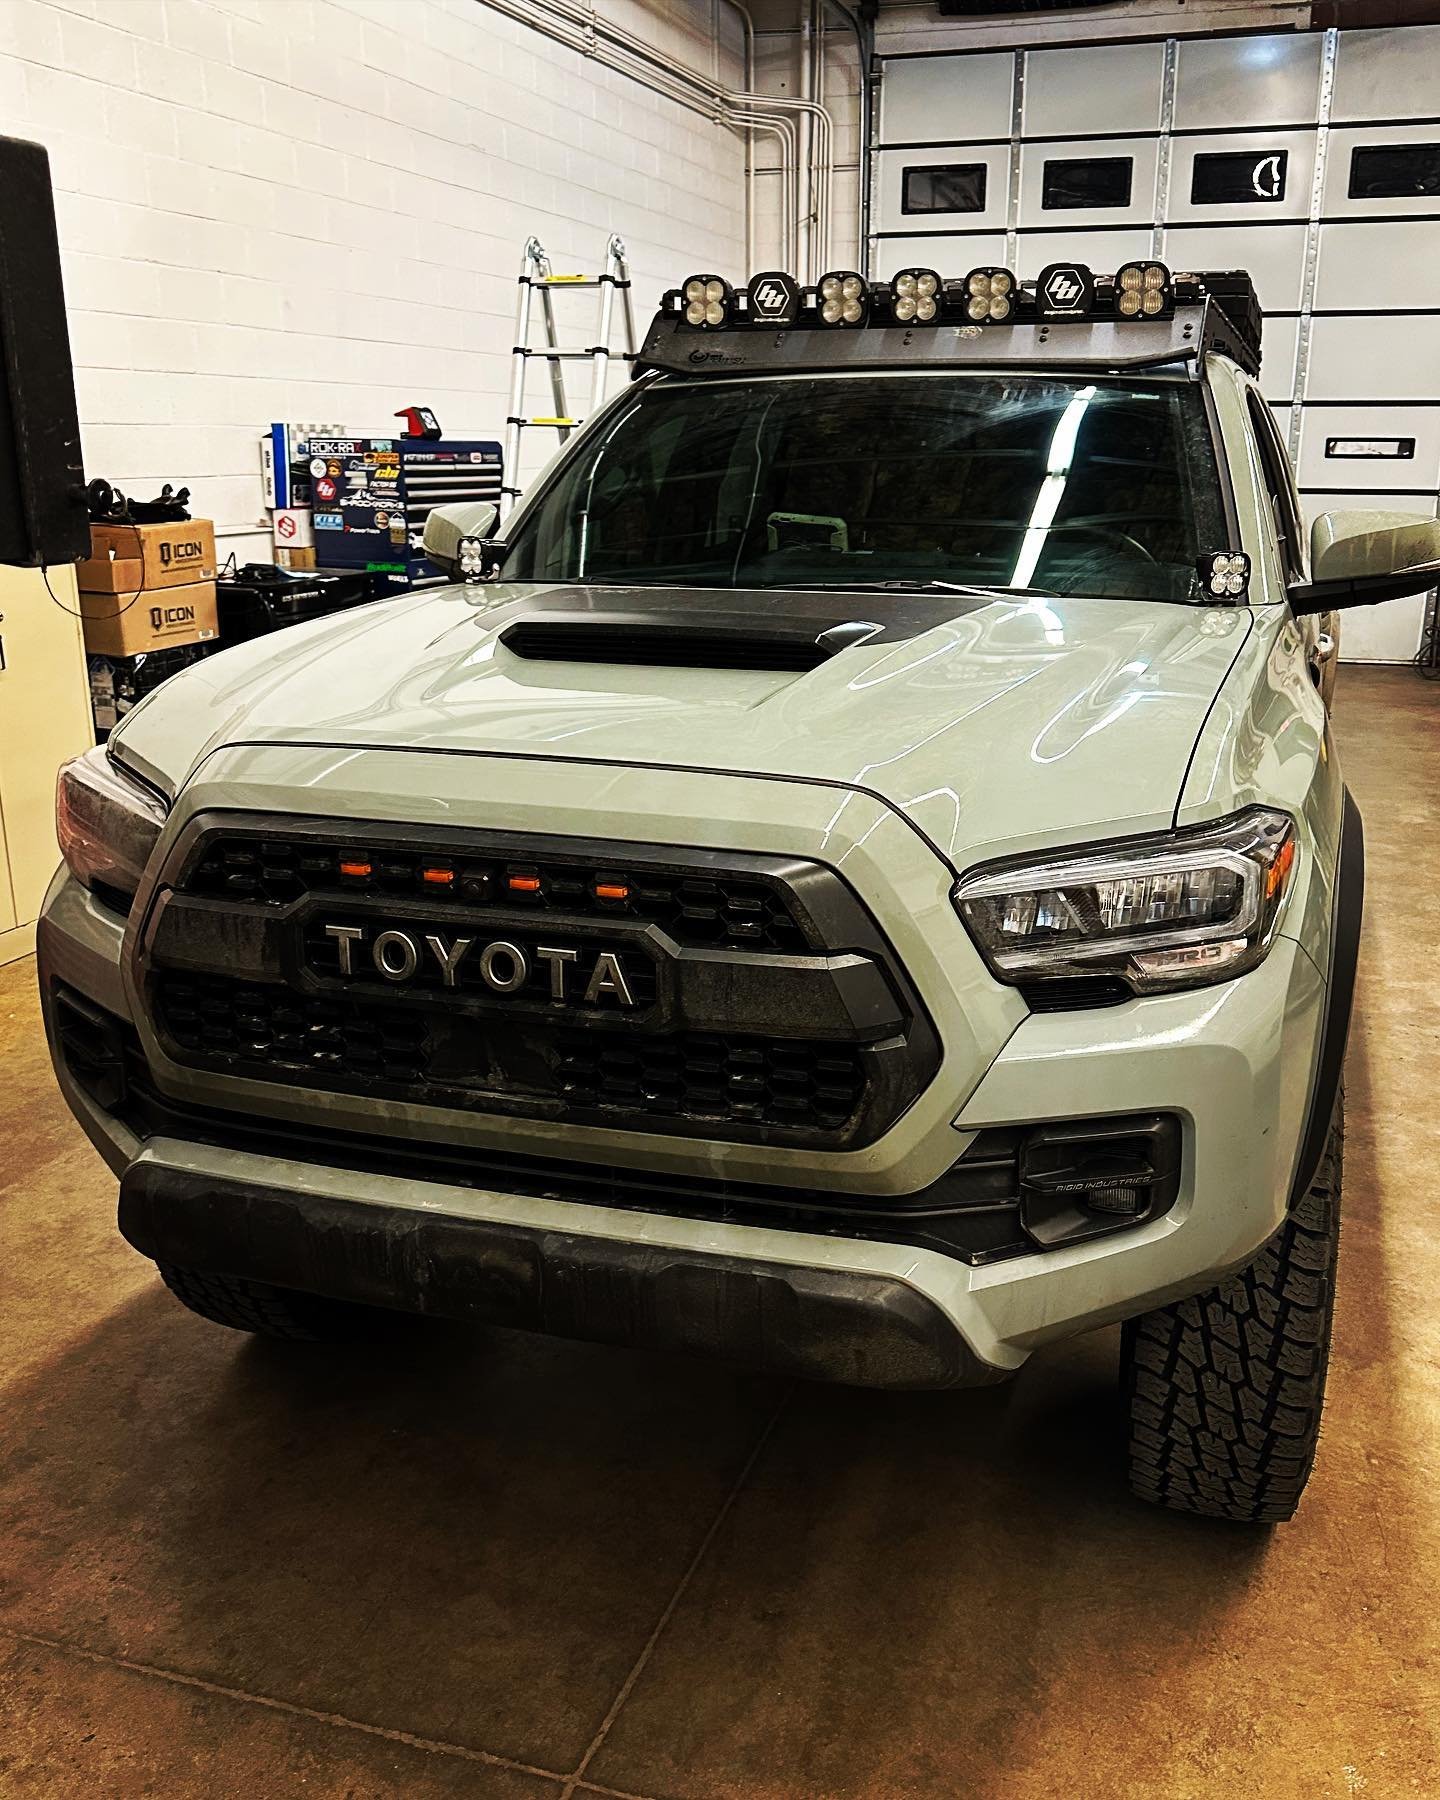 Spent some time hanging @powertrays HQ this weekend. @coloradomaverick worked his magic and tidied up the power system on the E13 Taco. This thing is ready for adventure.